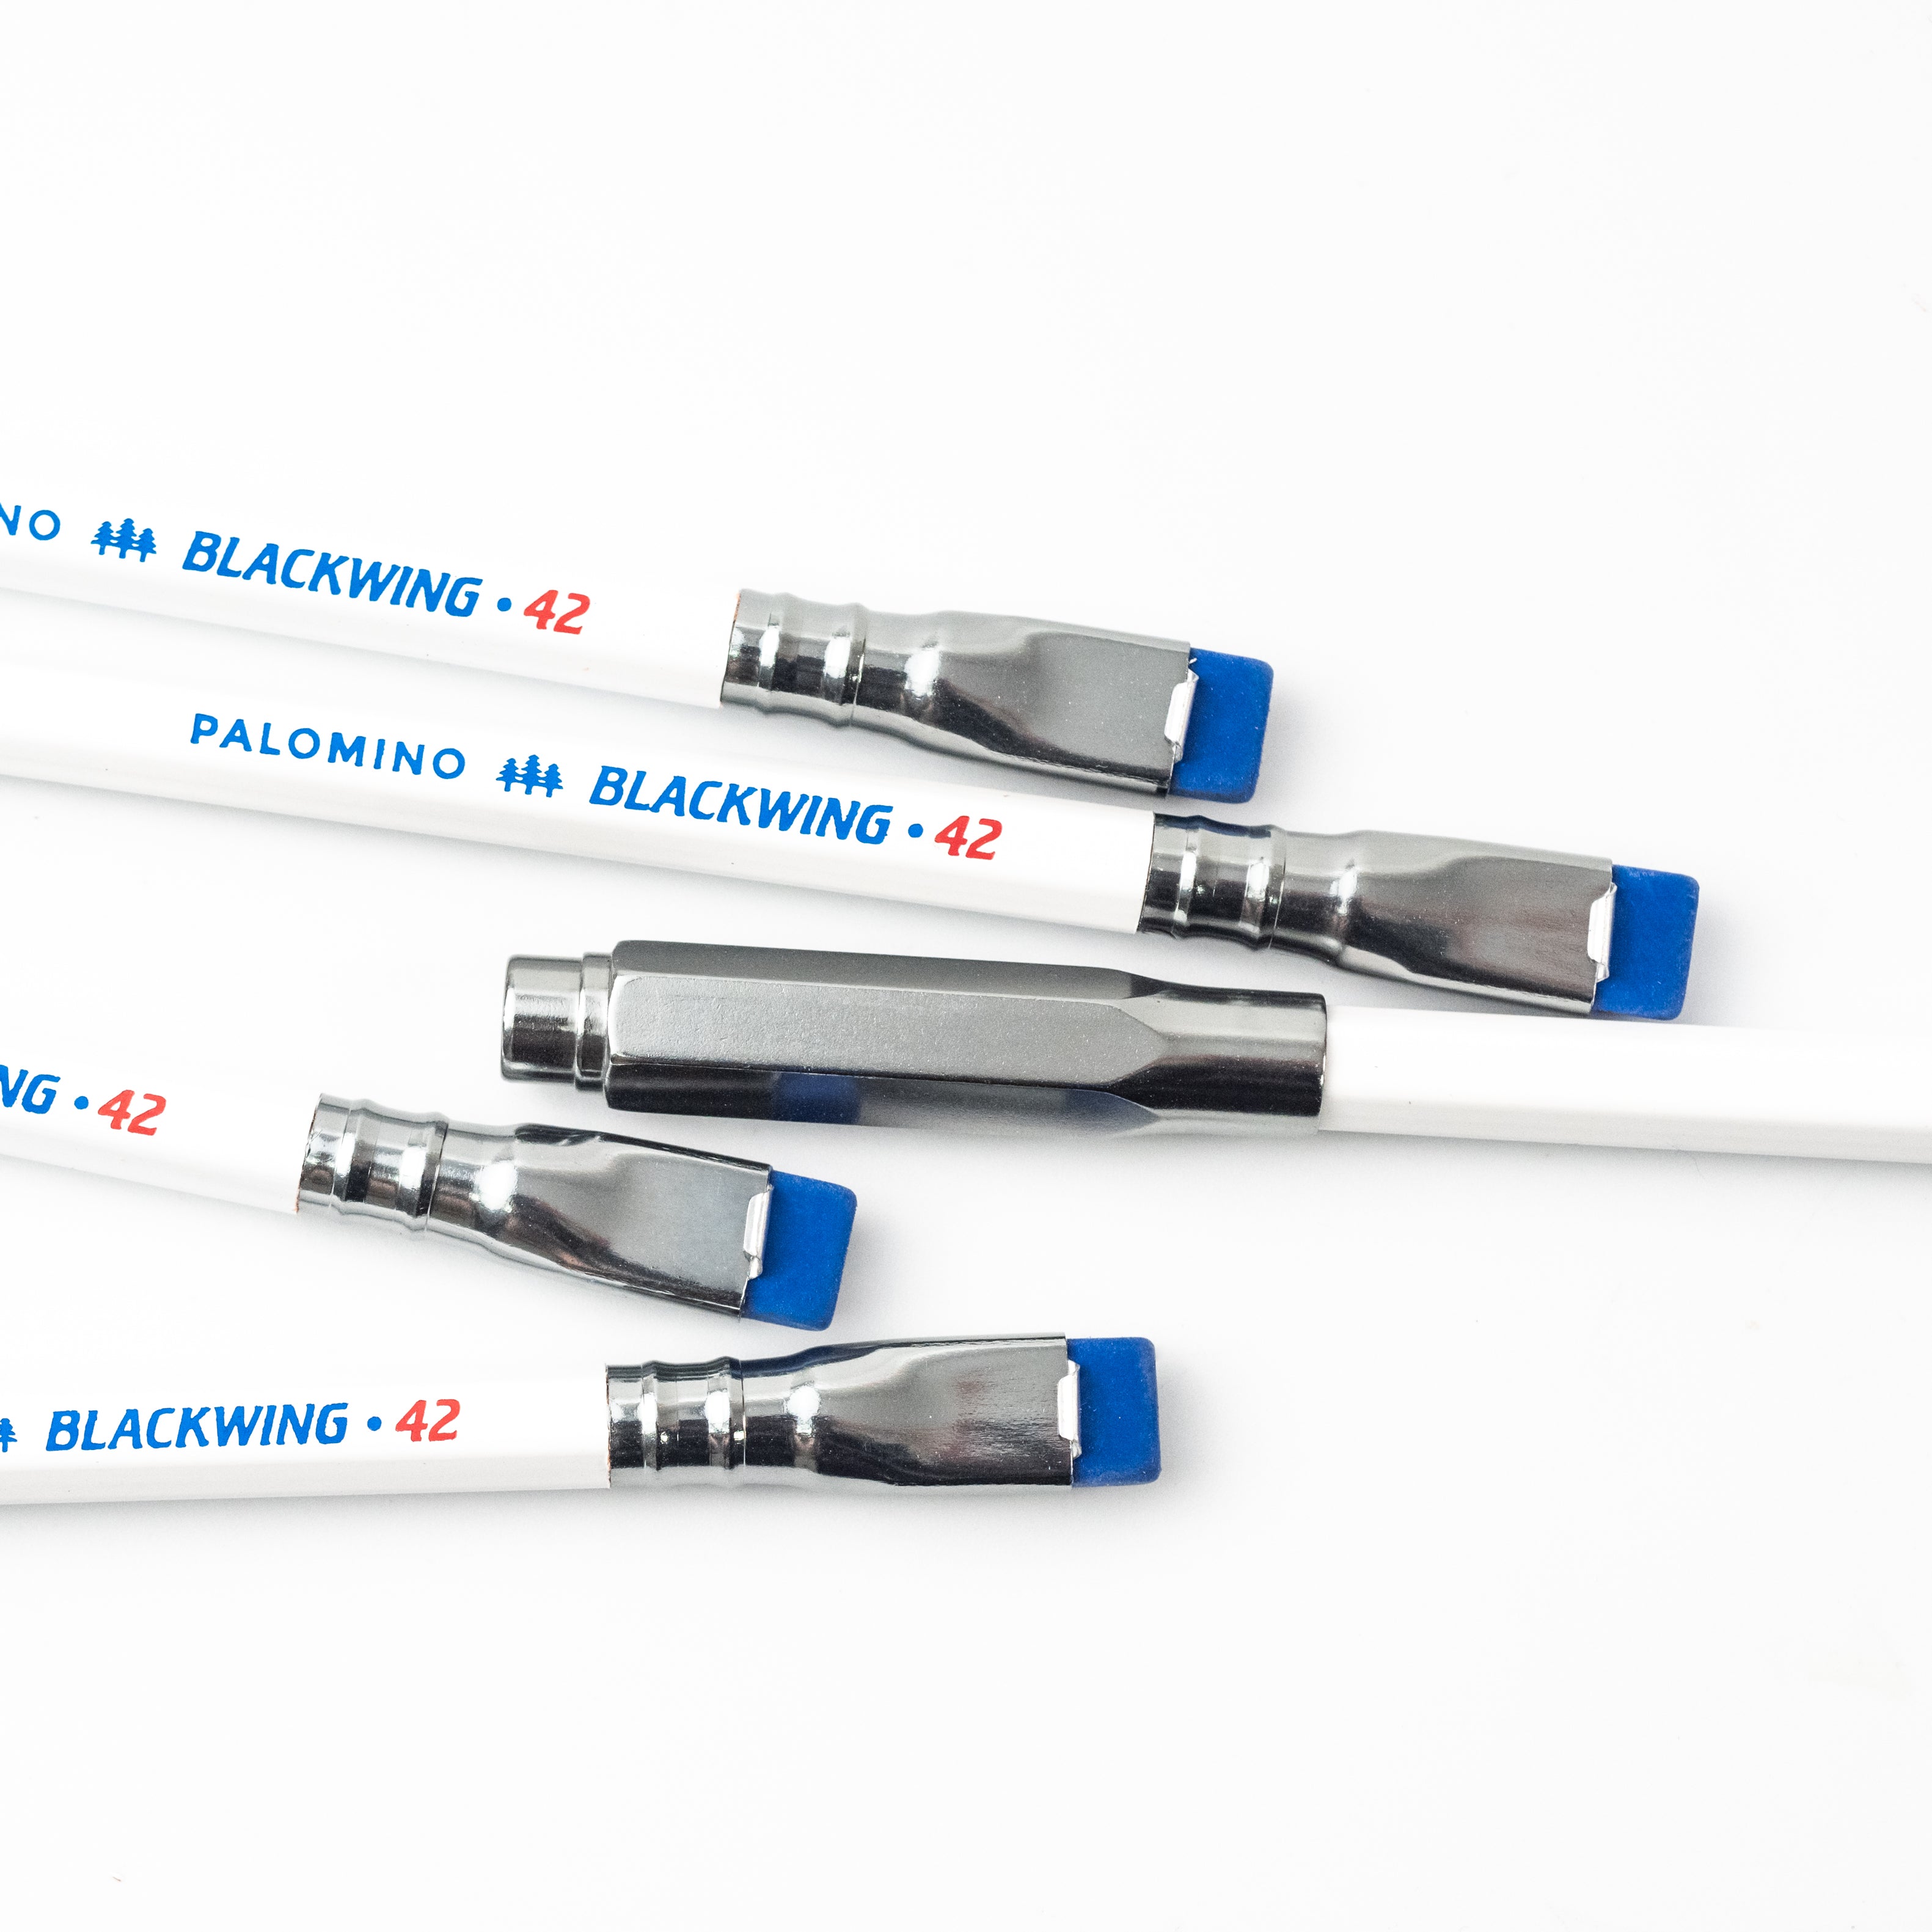 A group of white and blue pens, Blackwing 42 Point Guard - Road Gray (Dark Silver).